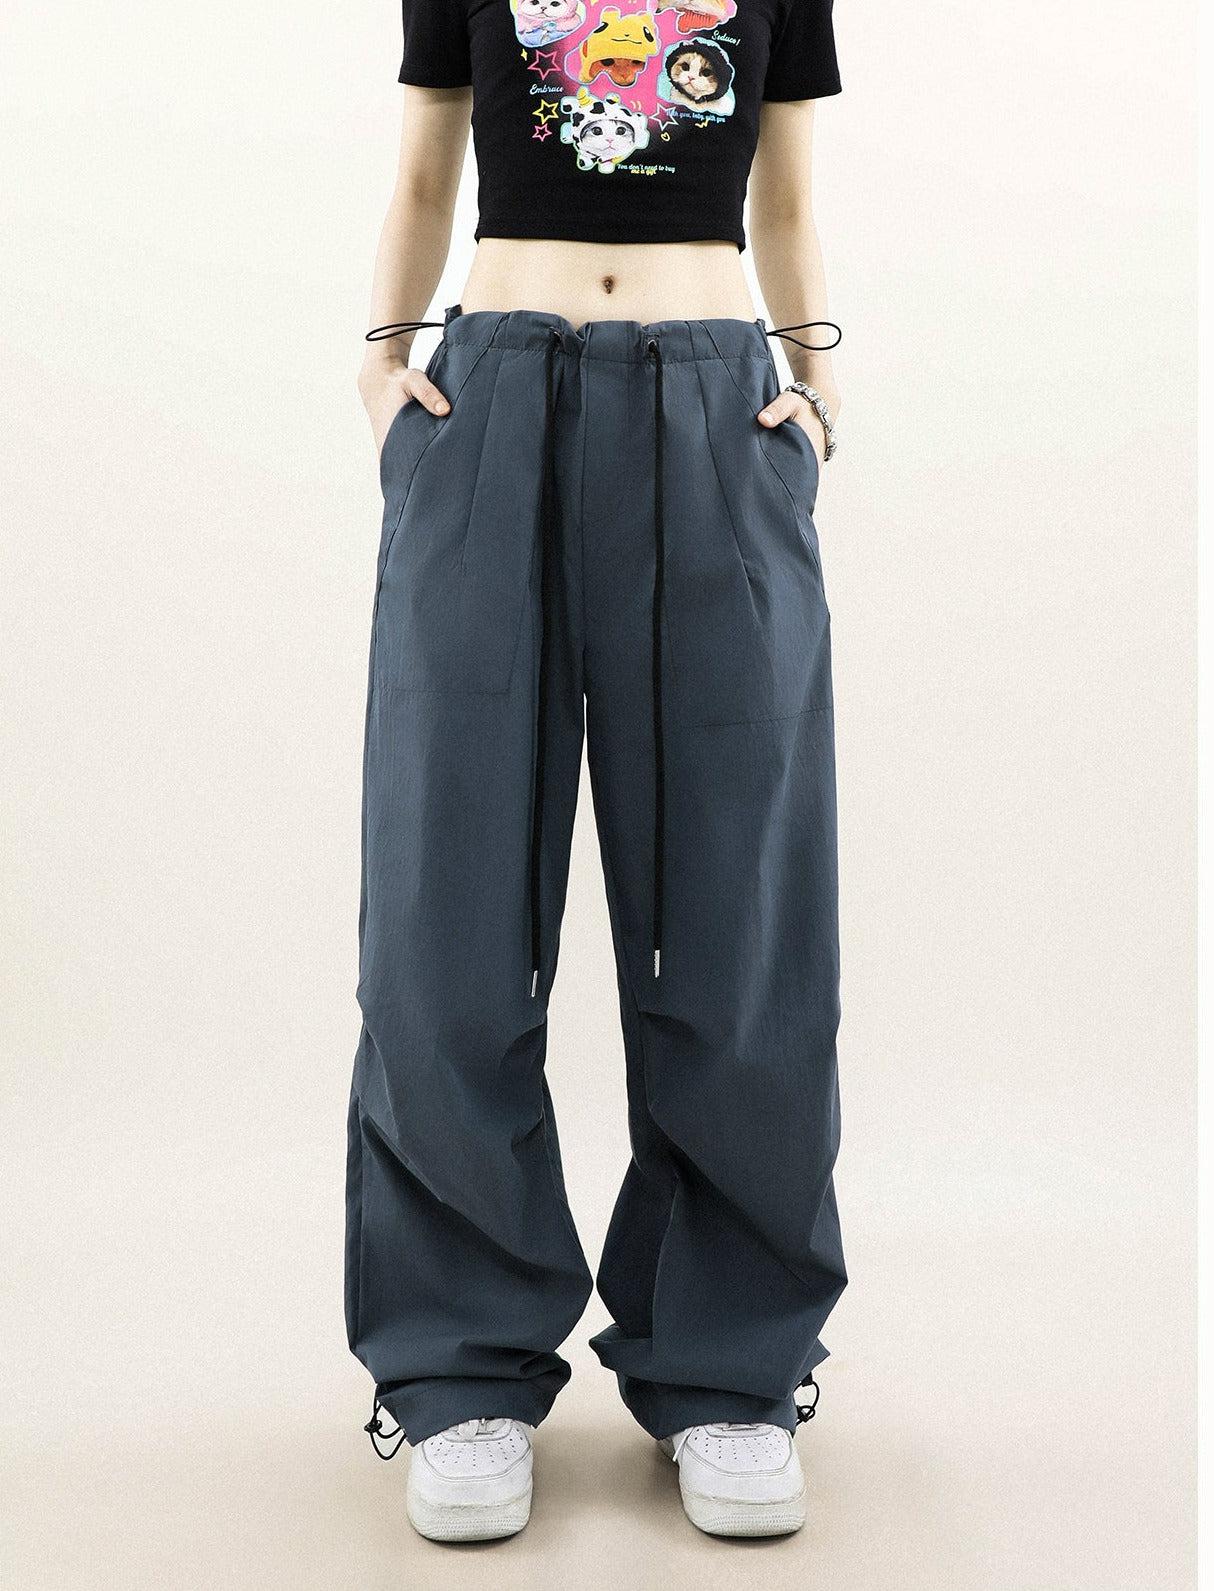 Mr Nearly Knee Pleated Drawstring Pants Korean Street Fashion Pants By Mr Nearly Shop Online at OH Vault